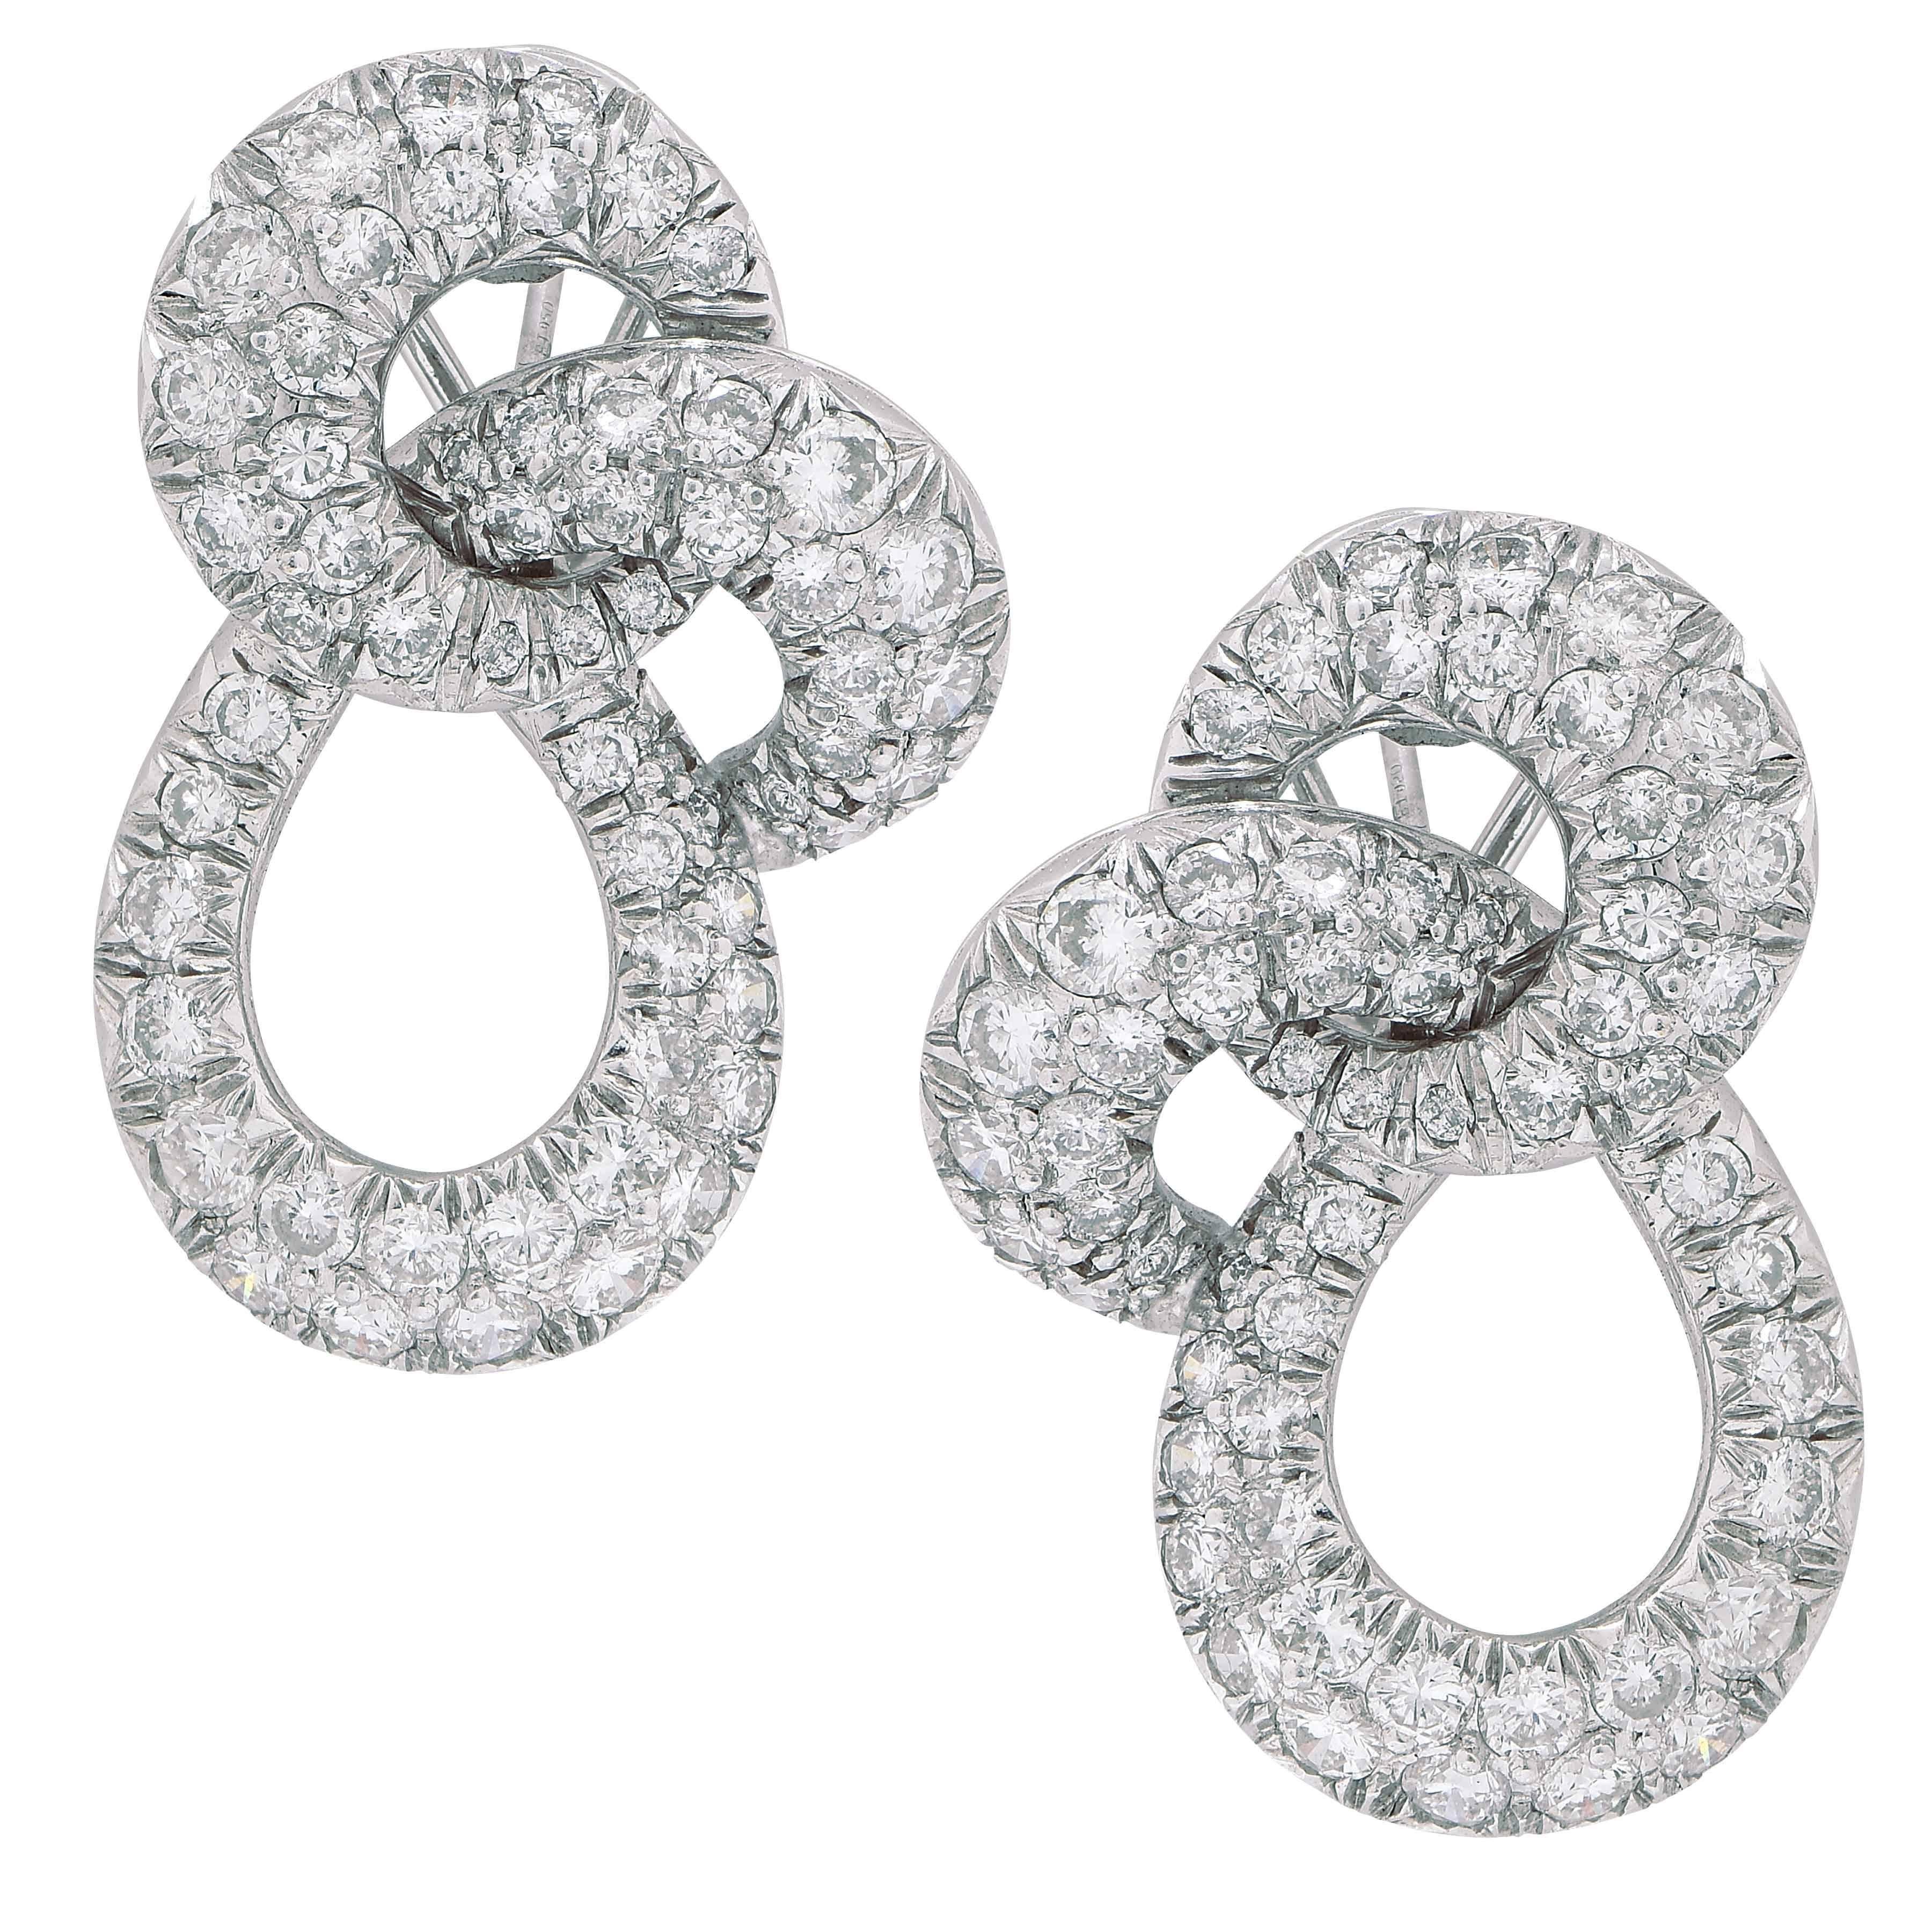 These extremely well crafted ear clips have 104 round brilliant cut diamonds weighing approximately 6 carats. The diamonds are F/G in color and VS in clarity. The pave setting on the front, and the finish on the reverse is of the best quality.